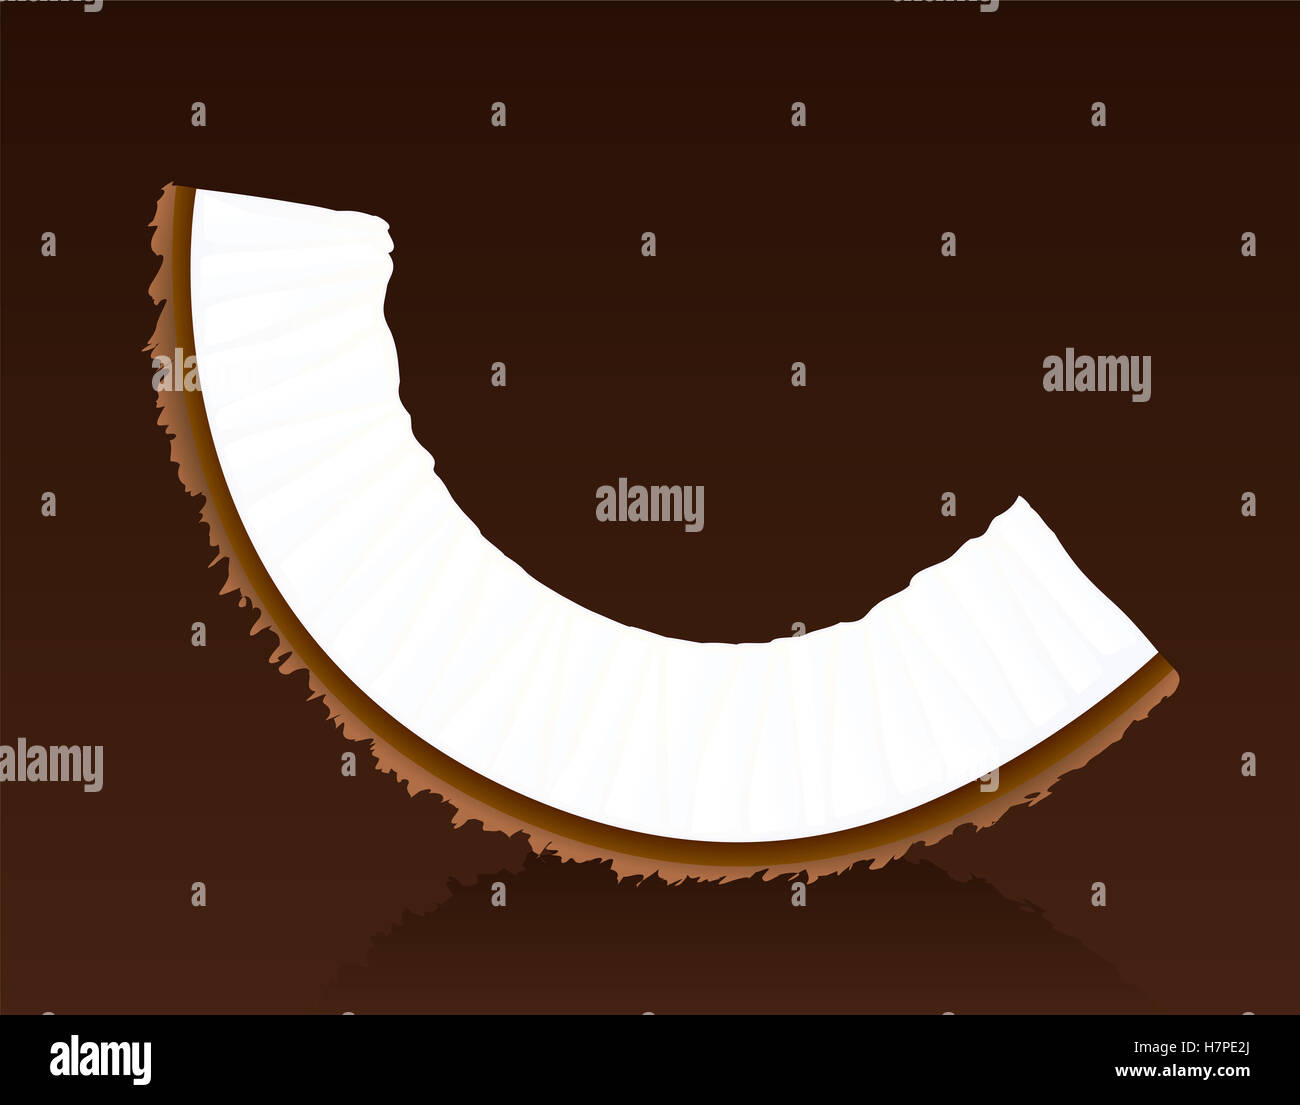 Coconut - single piece on brown background - vector illustration. Stock Photo